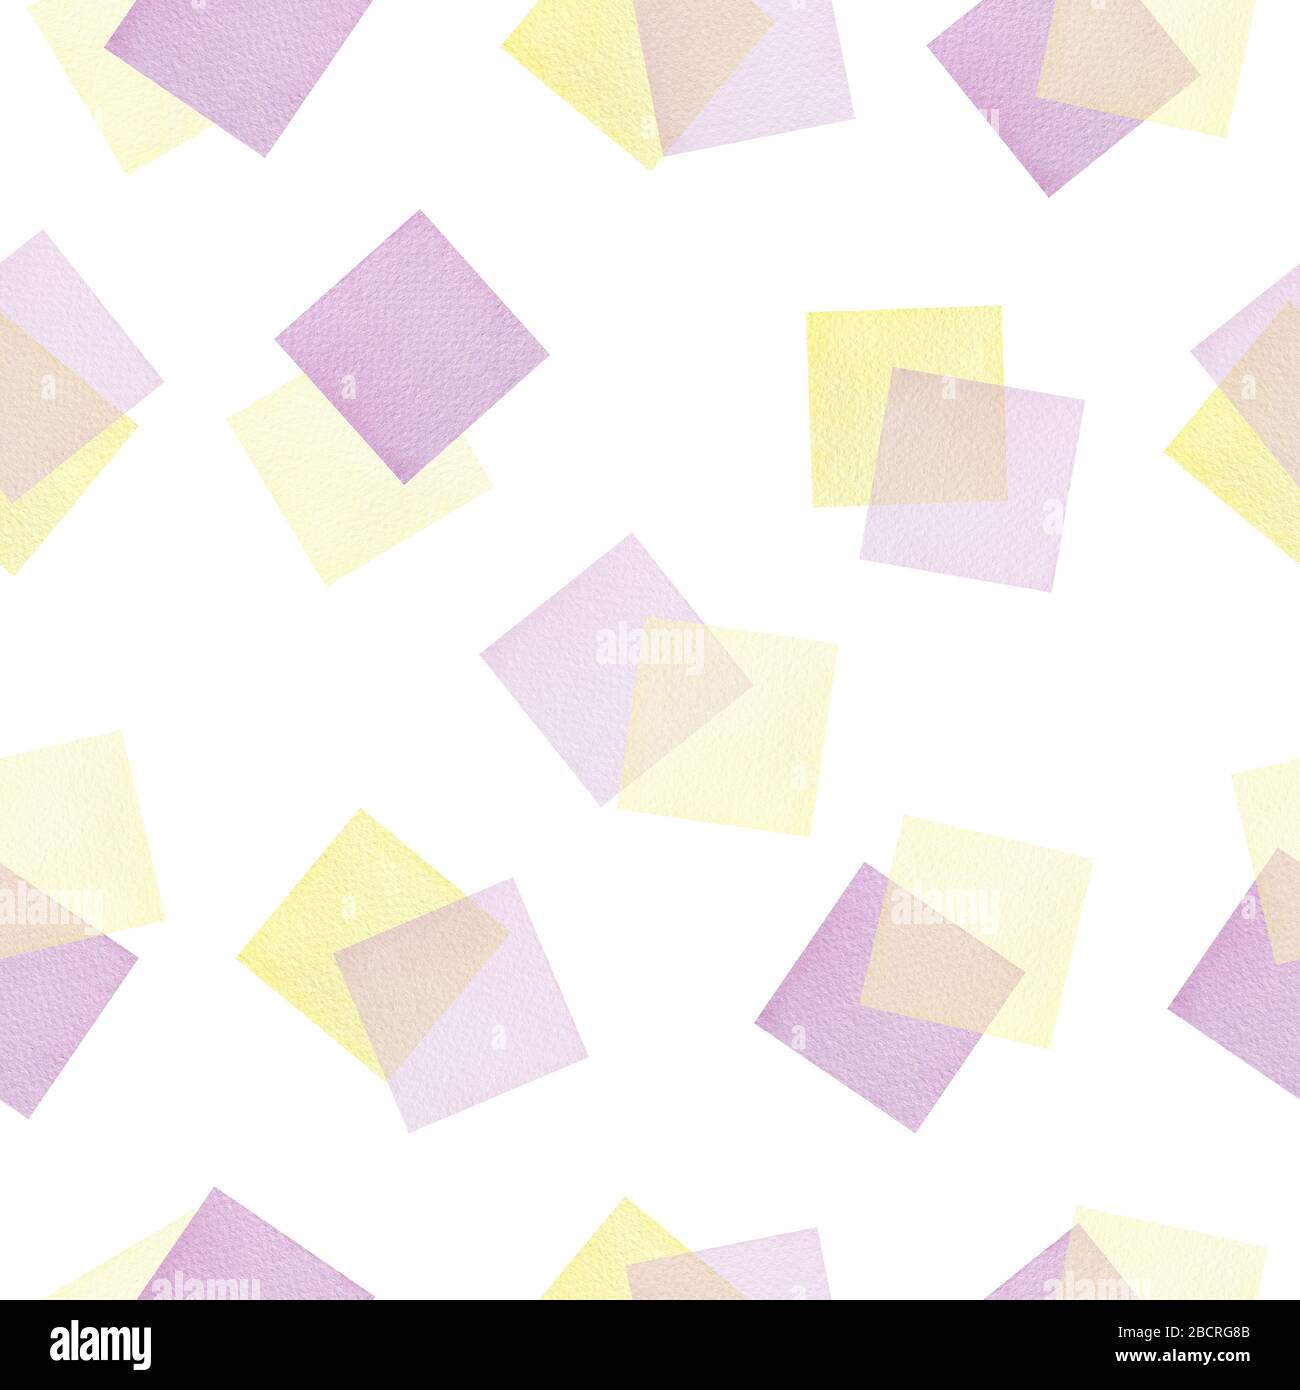 seamless repeat pattern with watercolor squares in purple and yellow hues , bright and happy pattern design for backgrounds, wrapping projects Stock Photo